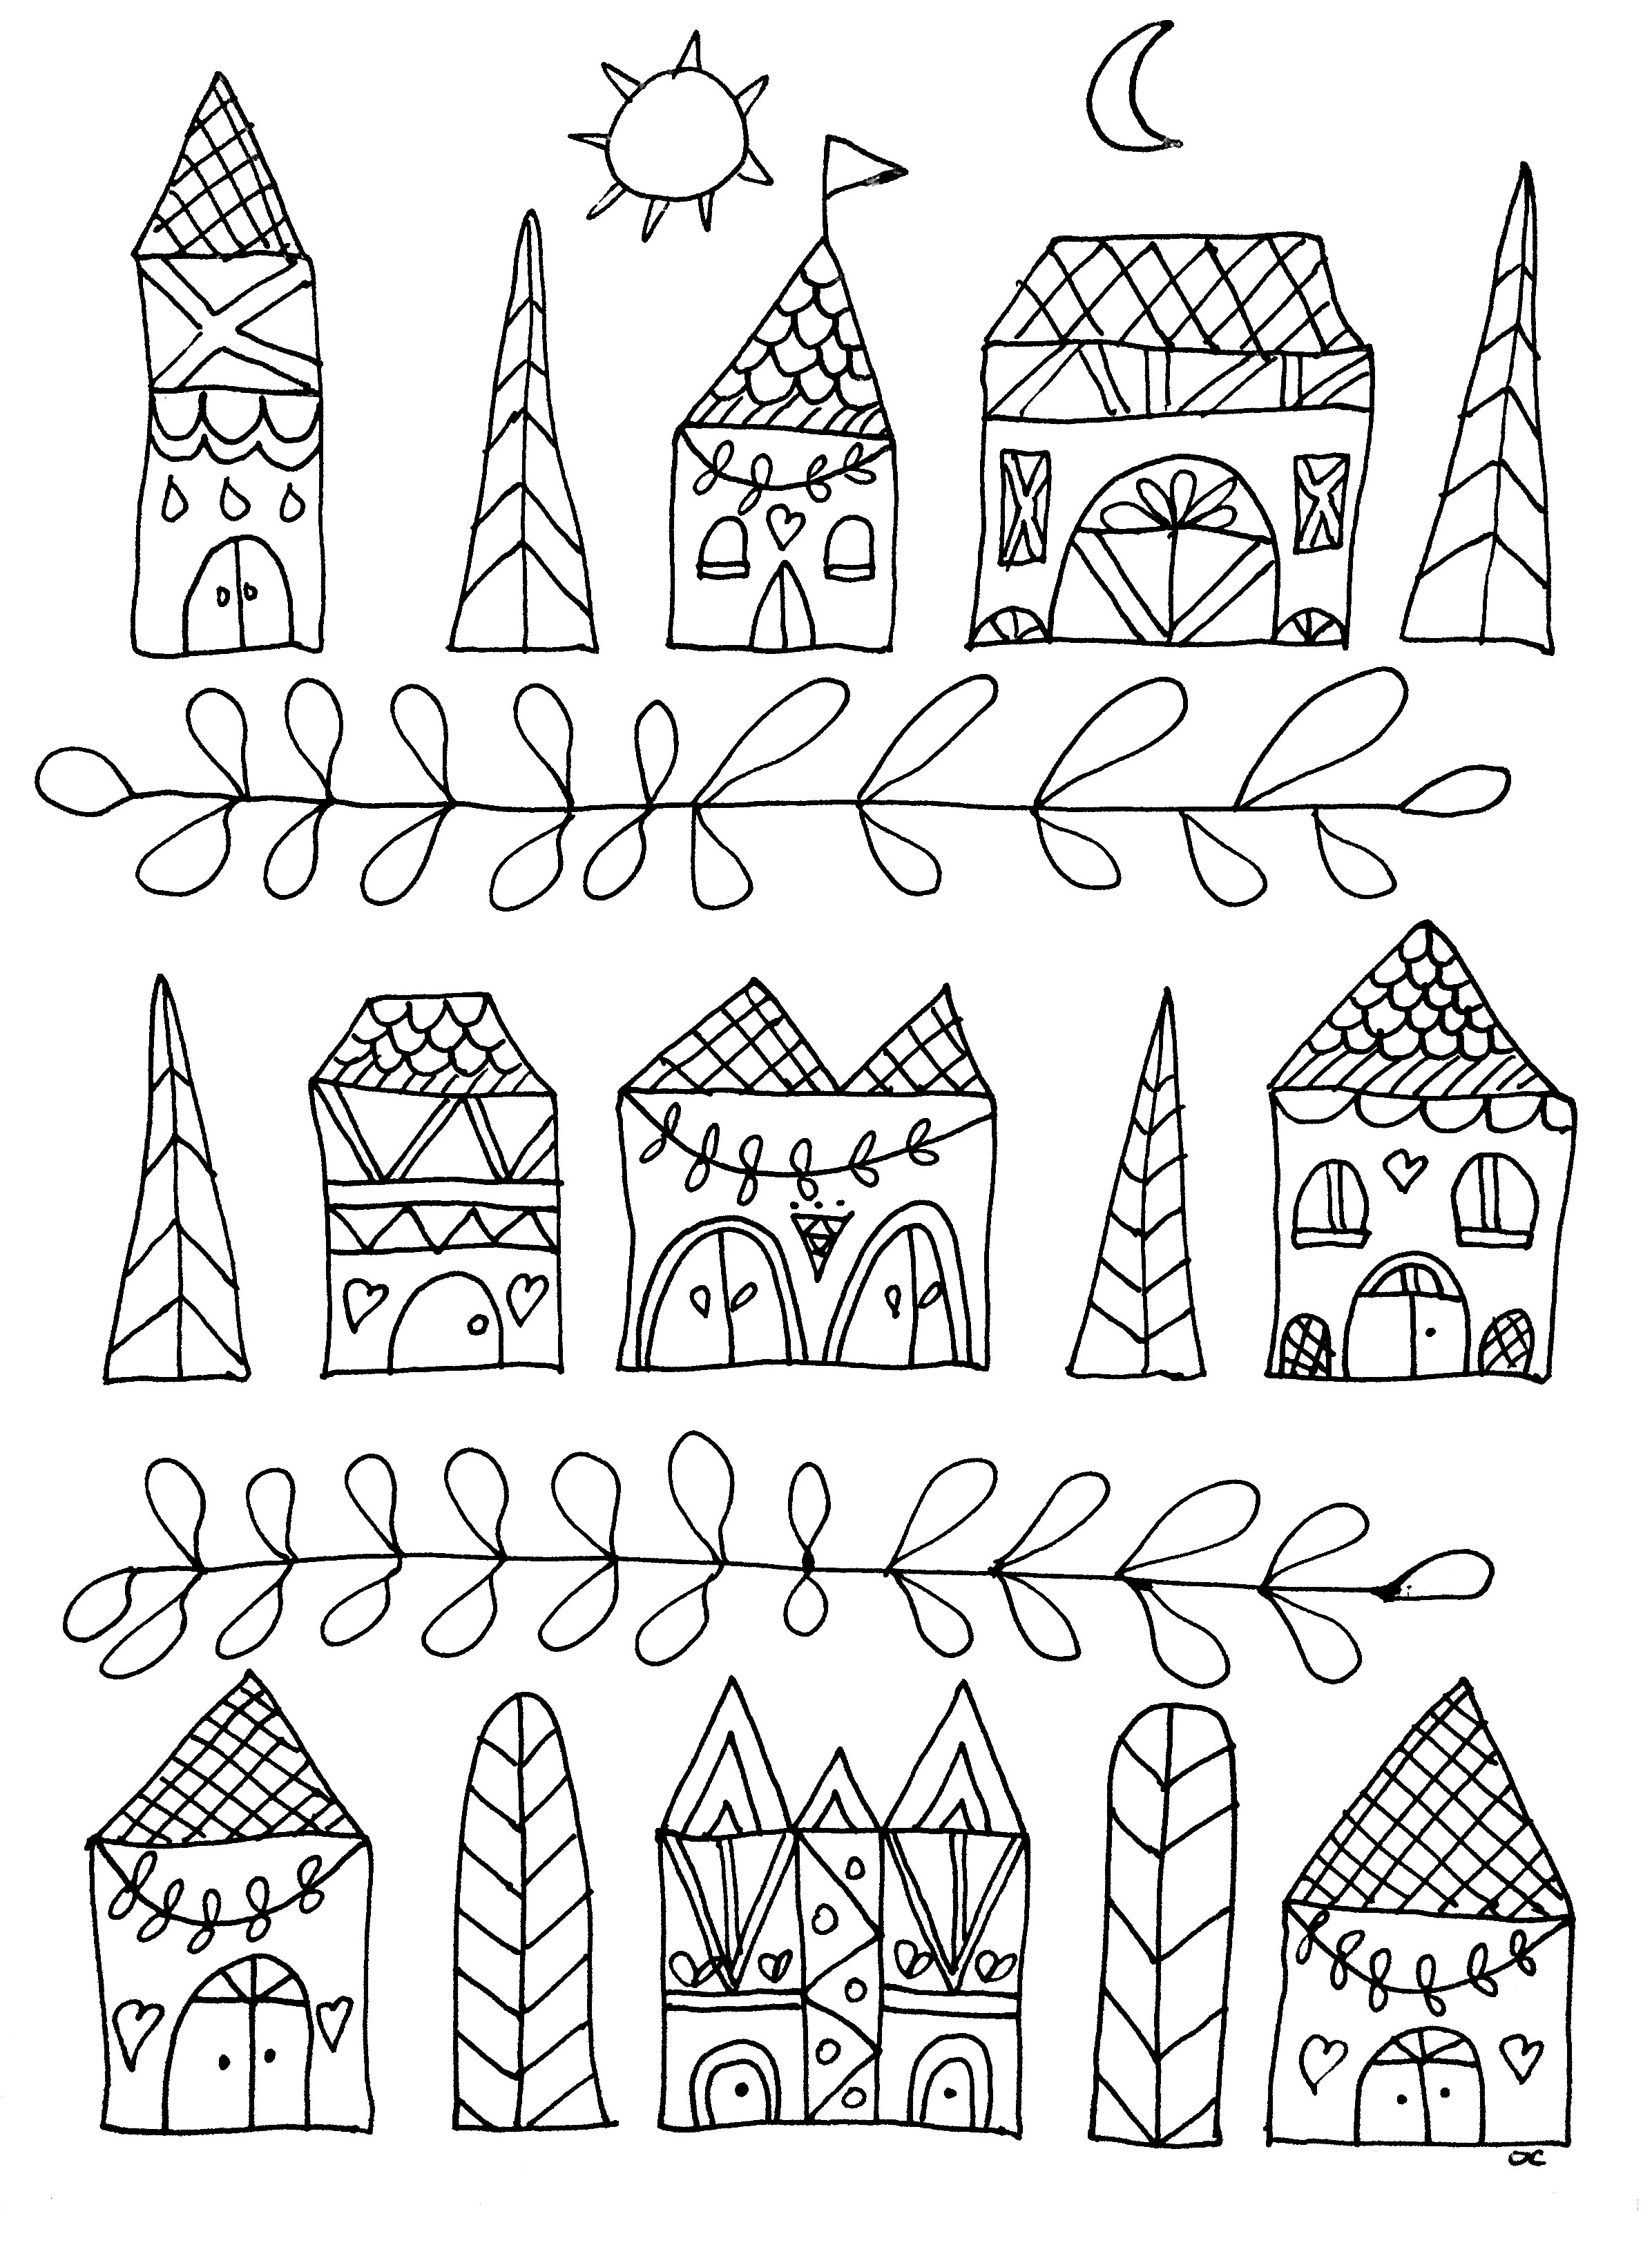 Simple drawing with cute houses